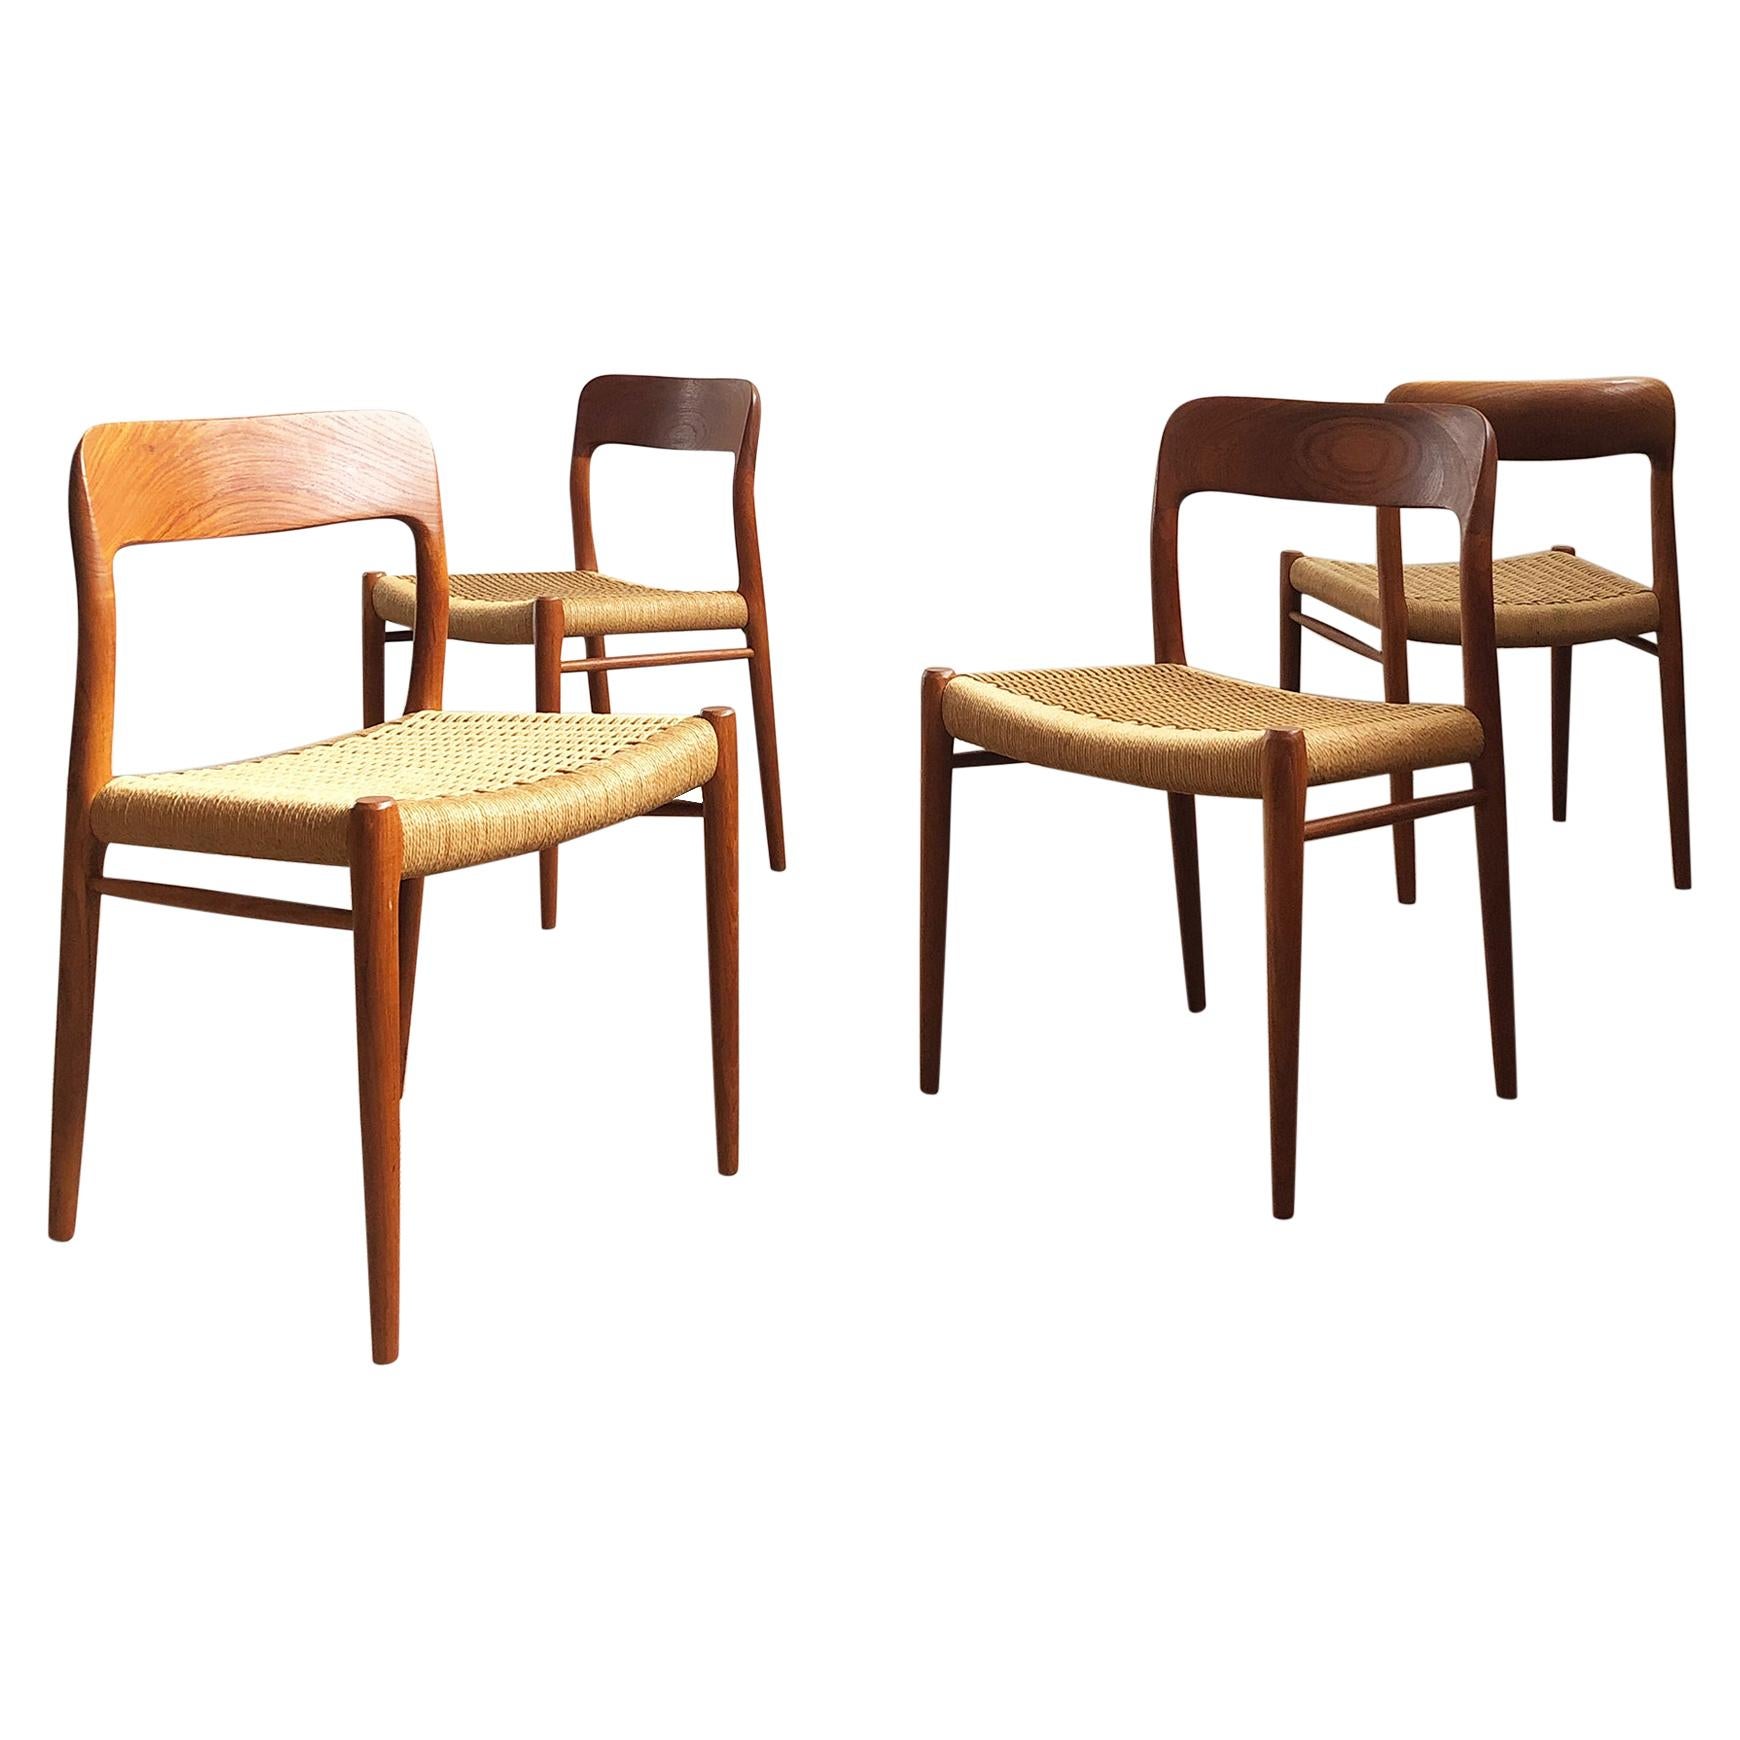 Dining Chairs, Model 75 by Niels O. Møller in Teak and Paper Cord, Set of 4 For Sale